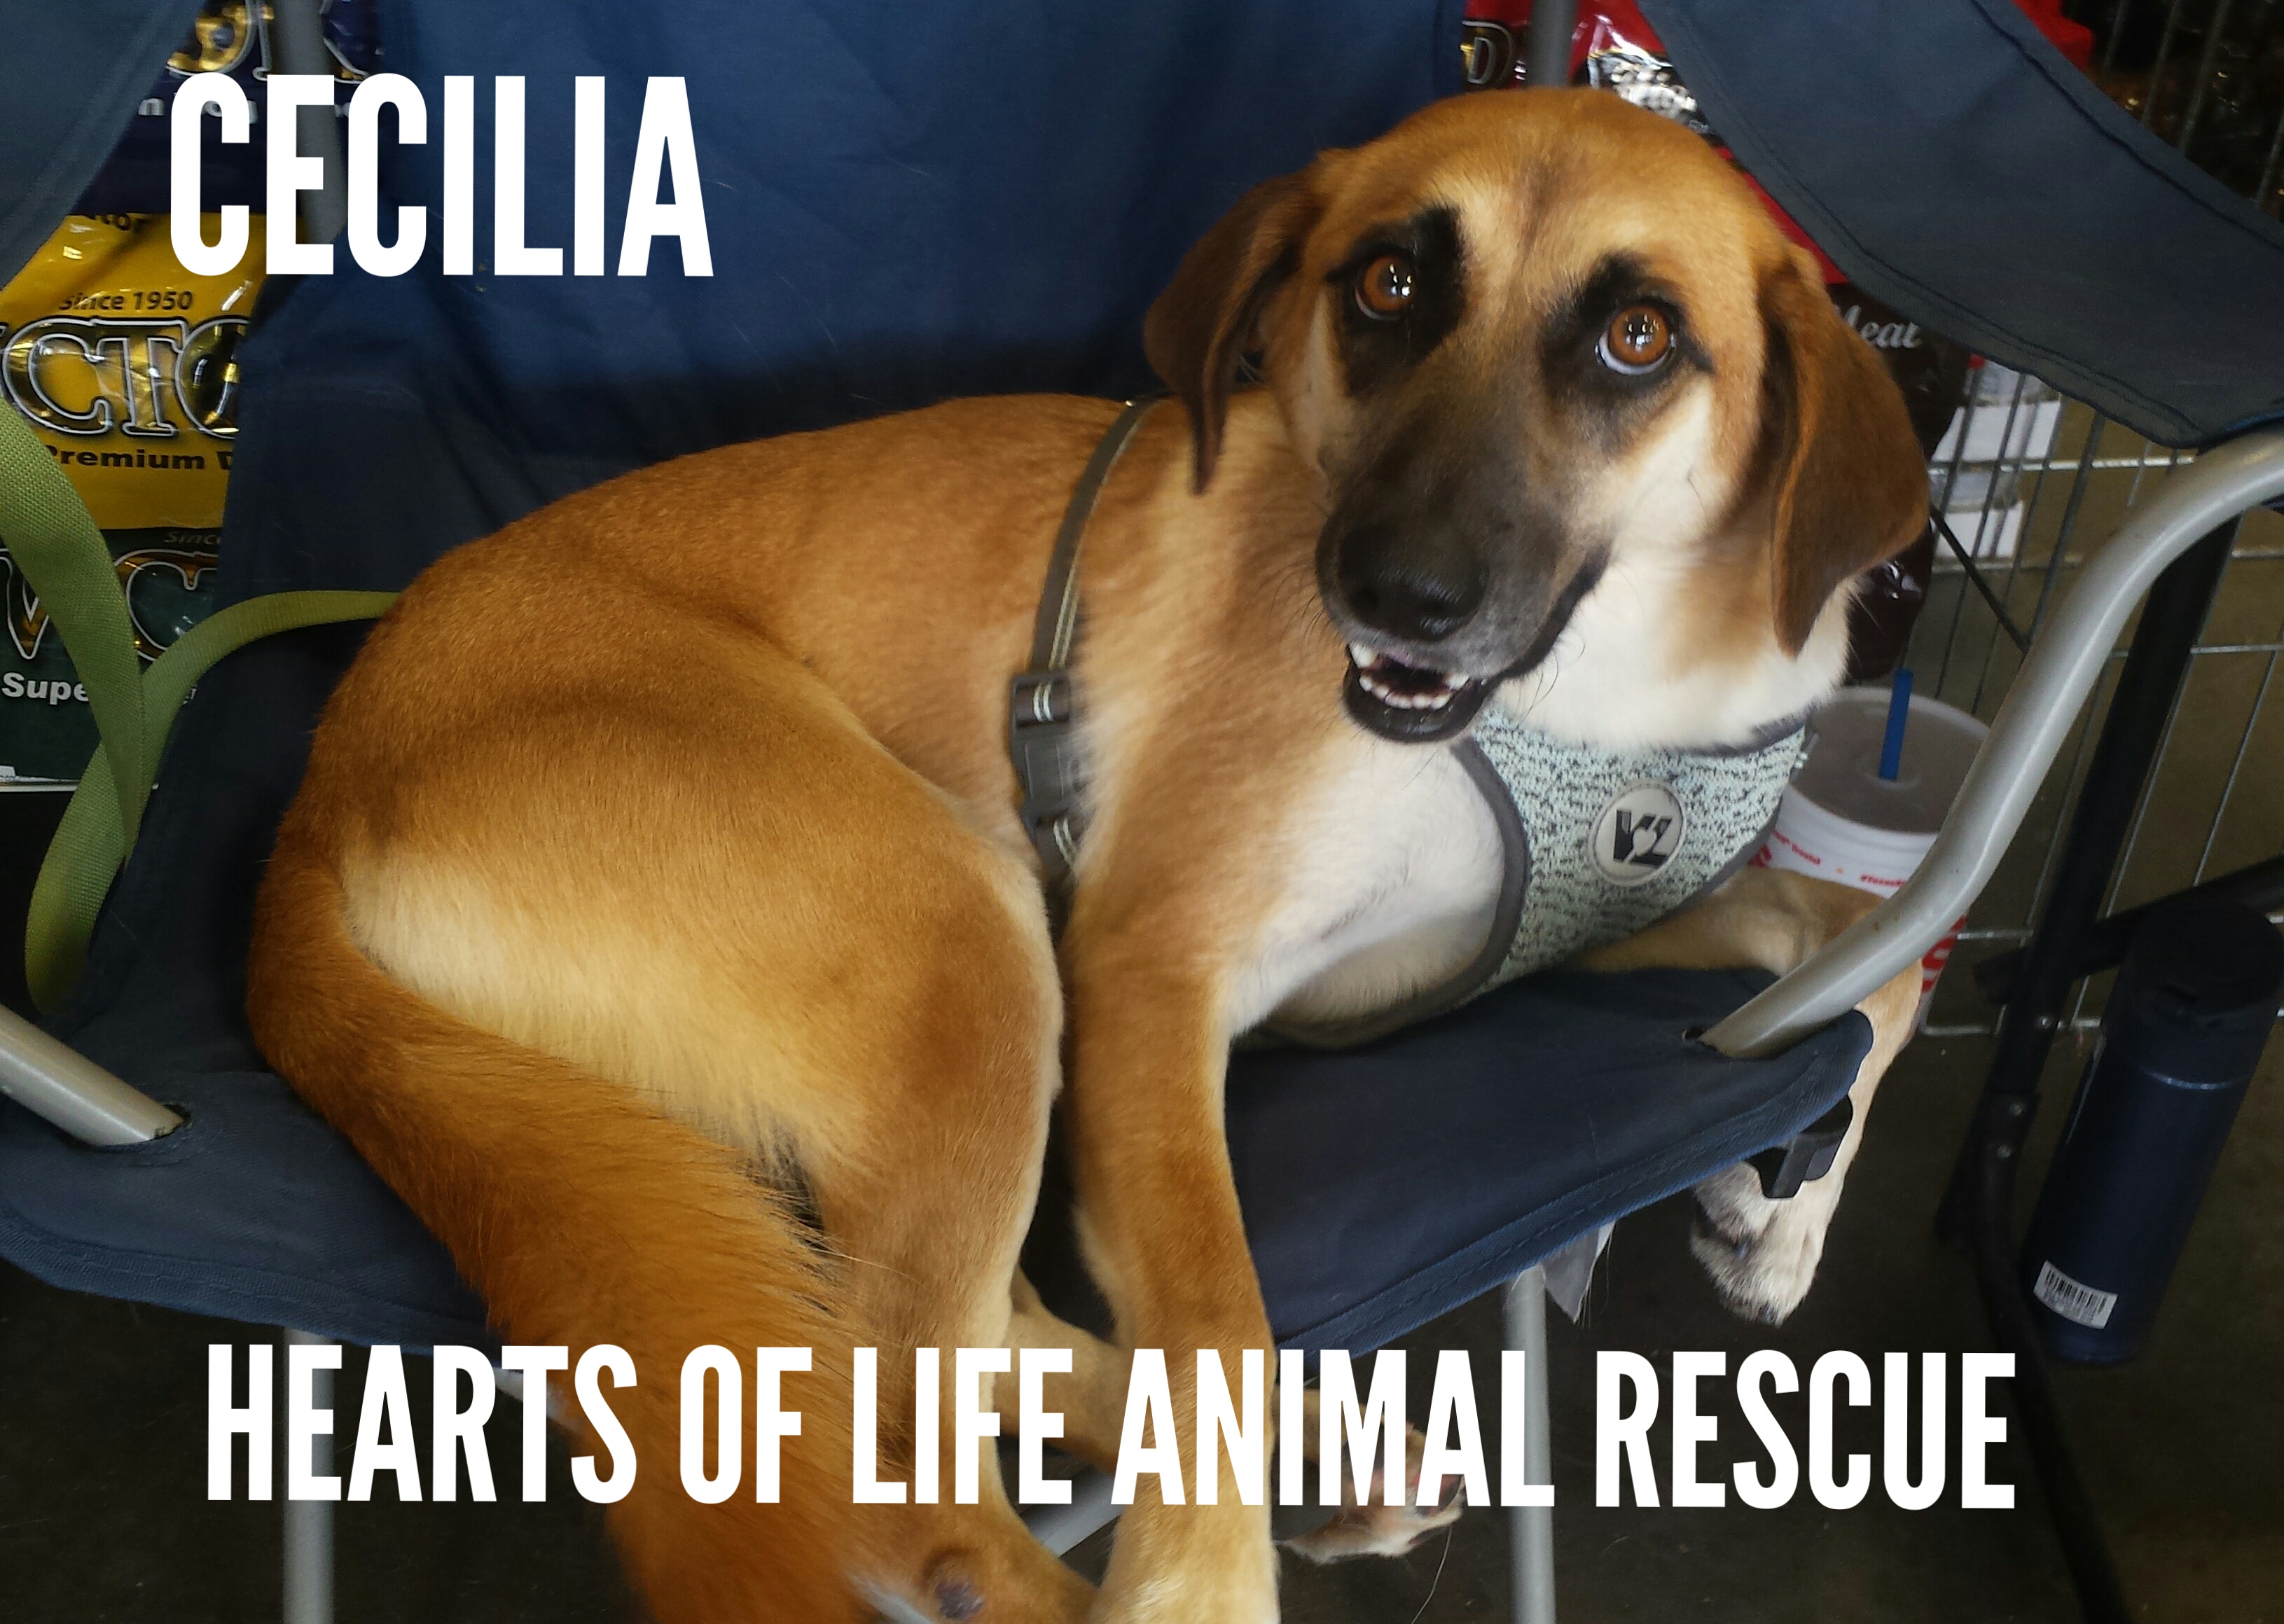 Hearts of Life Animal Rescue Dog of the Week: Meet Cecilia!